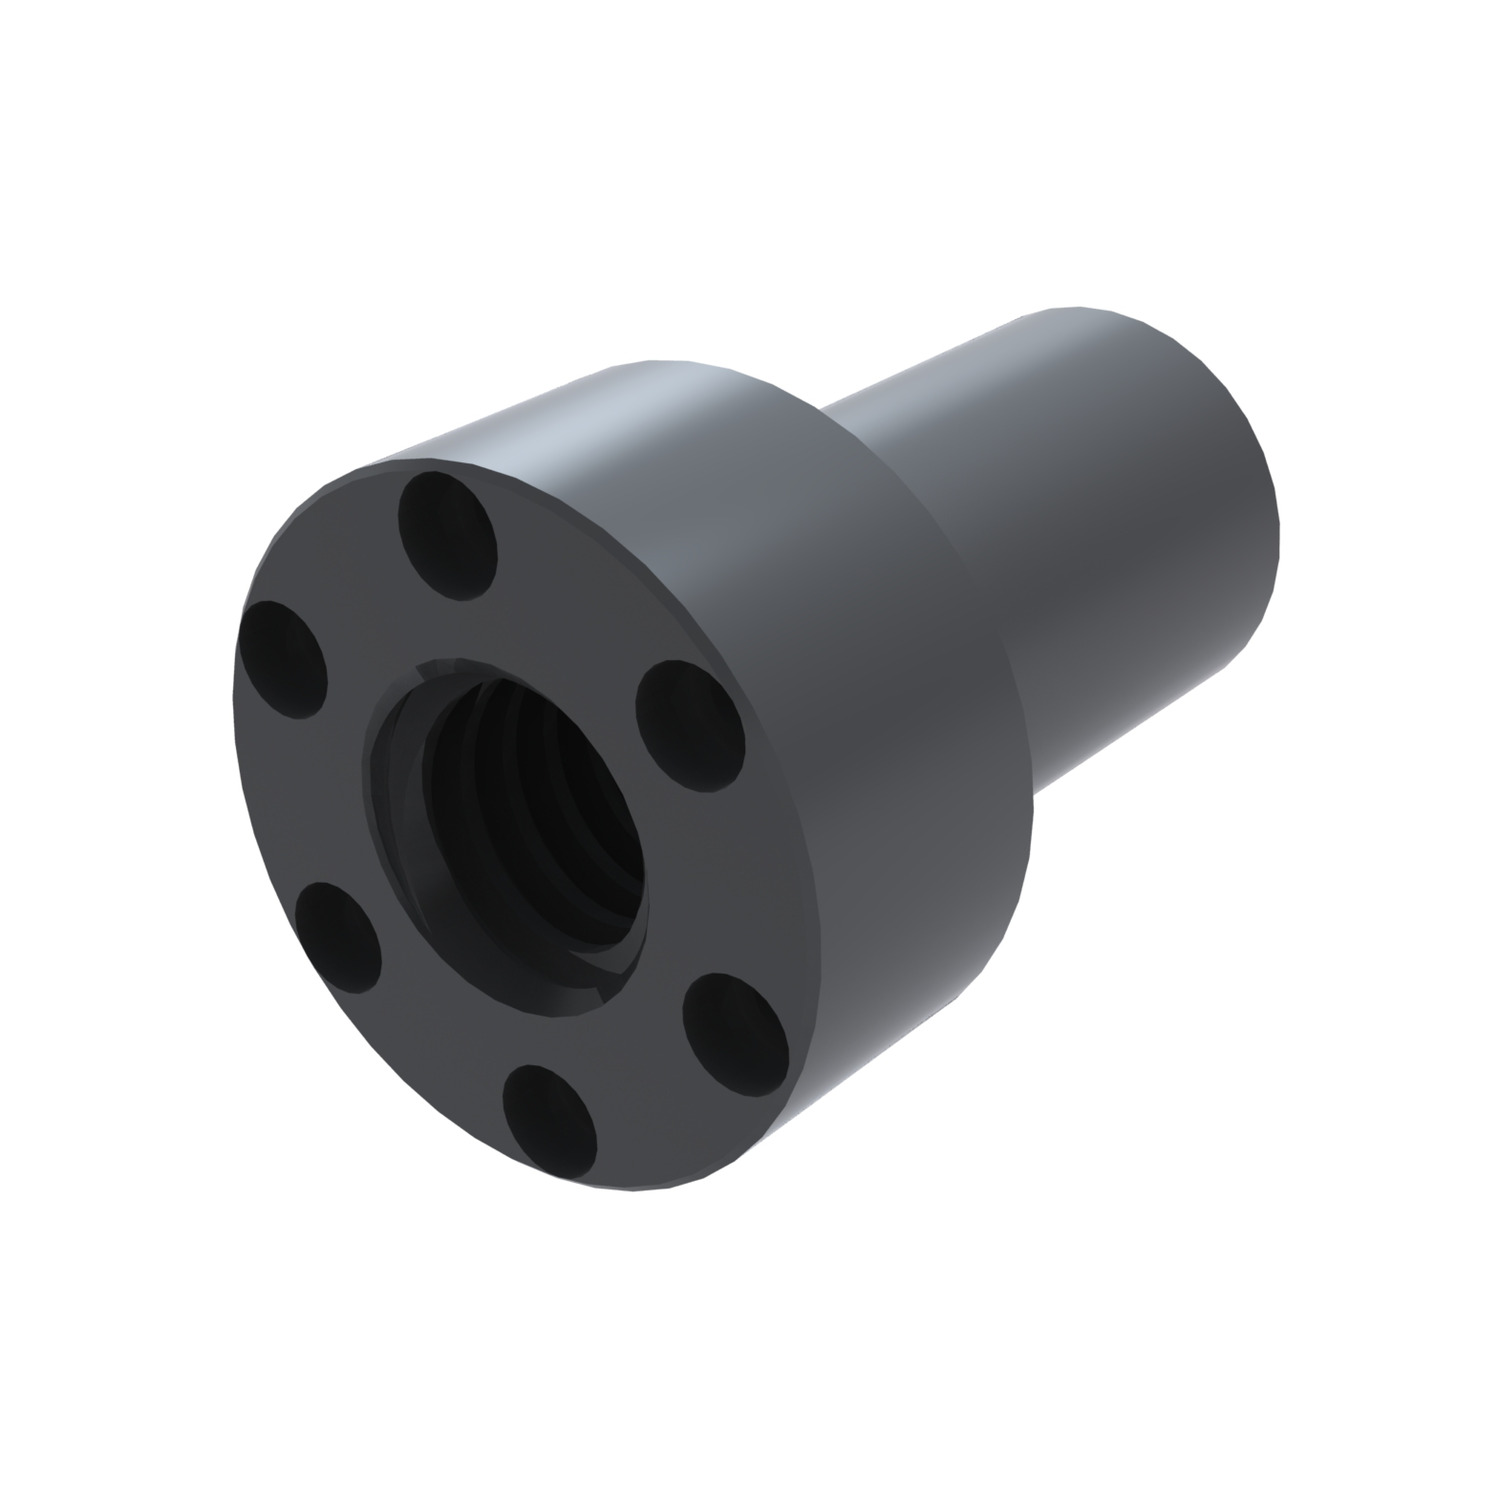 Flanged Self-Lubricating Plastic Nut Plastic, flanged lead screw nuts with long thread to reduce wear and enhance service lifetime.